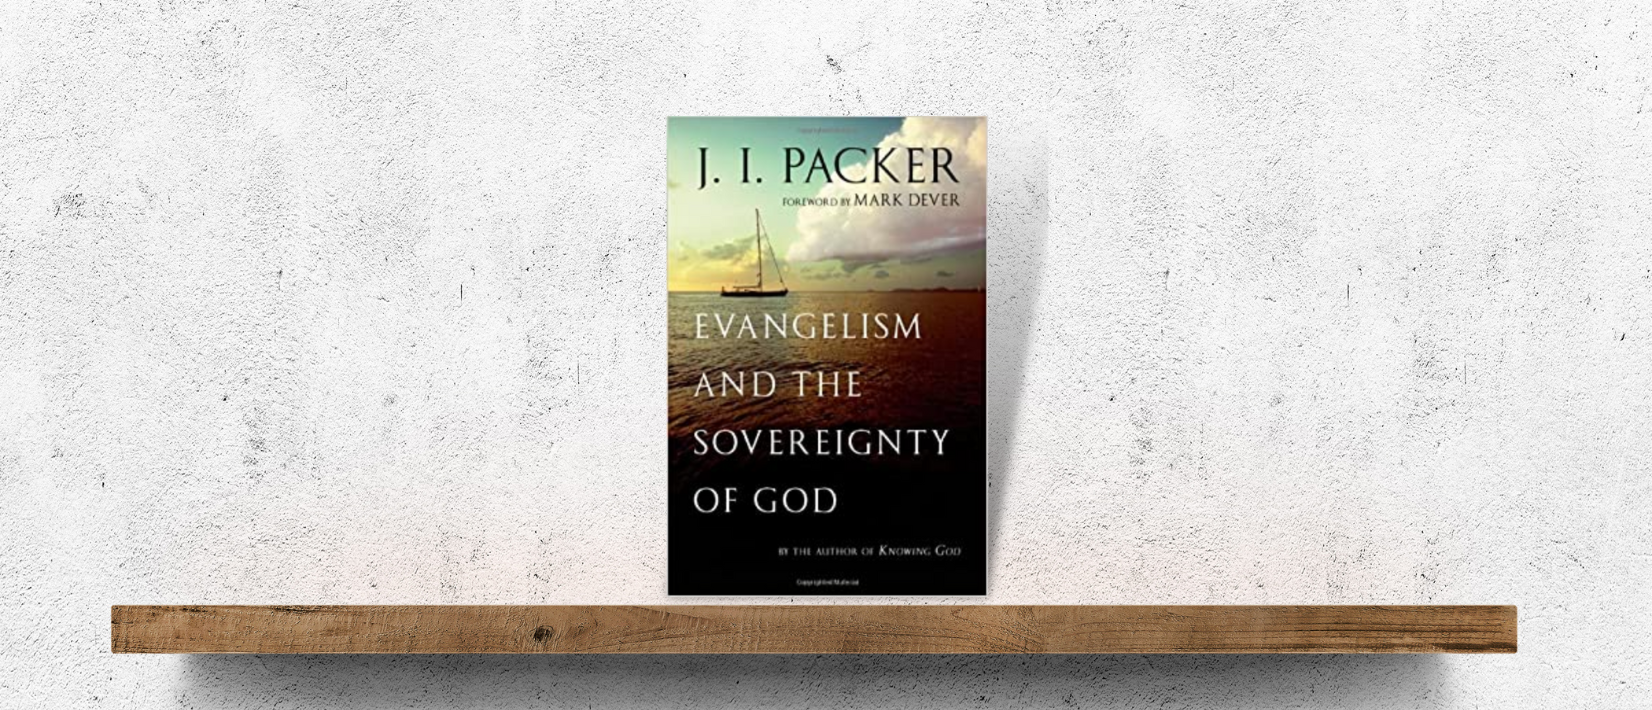 Image of the cover of the book 'Evangelism and the Sovereignty of God' by J.I. Packer